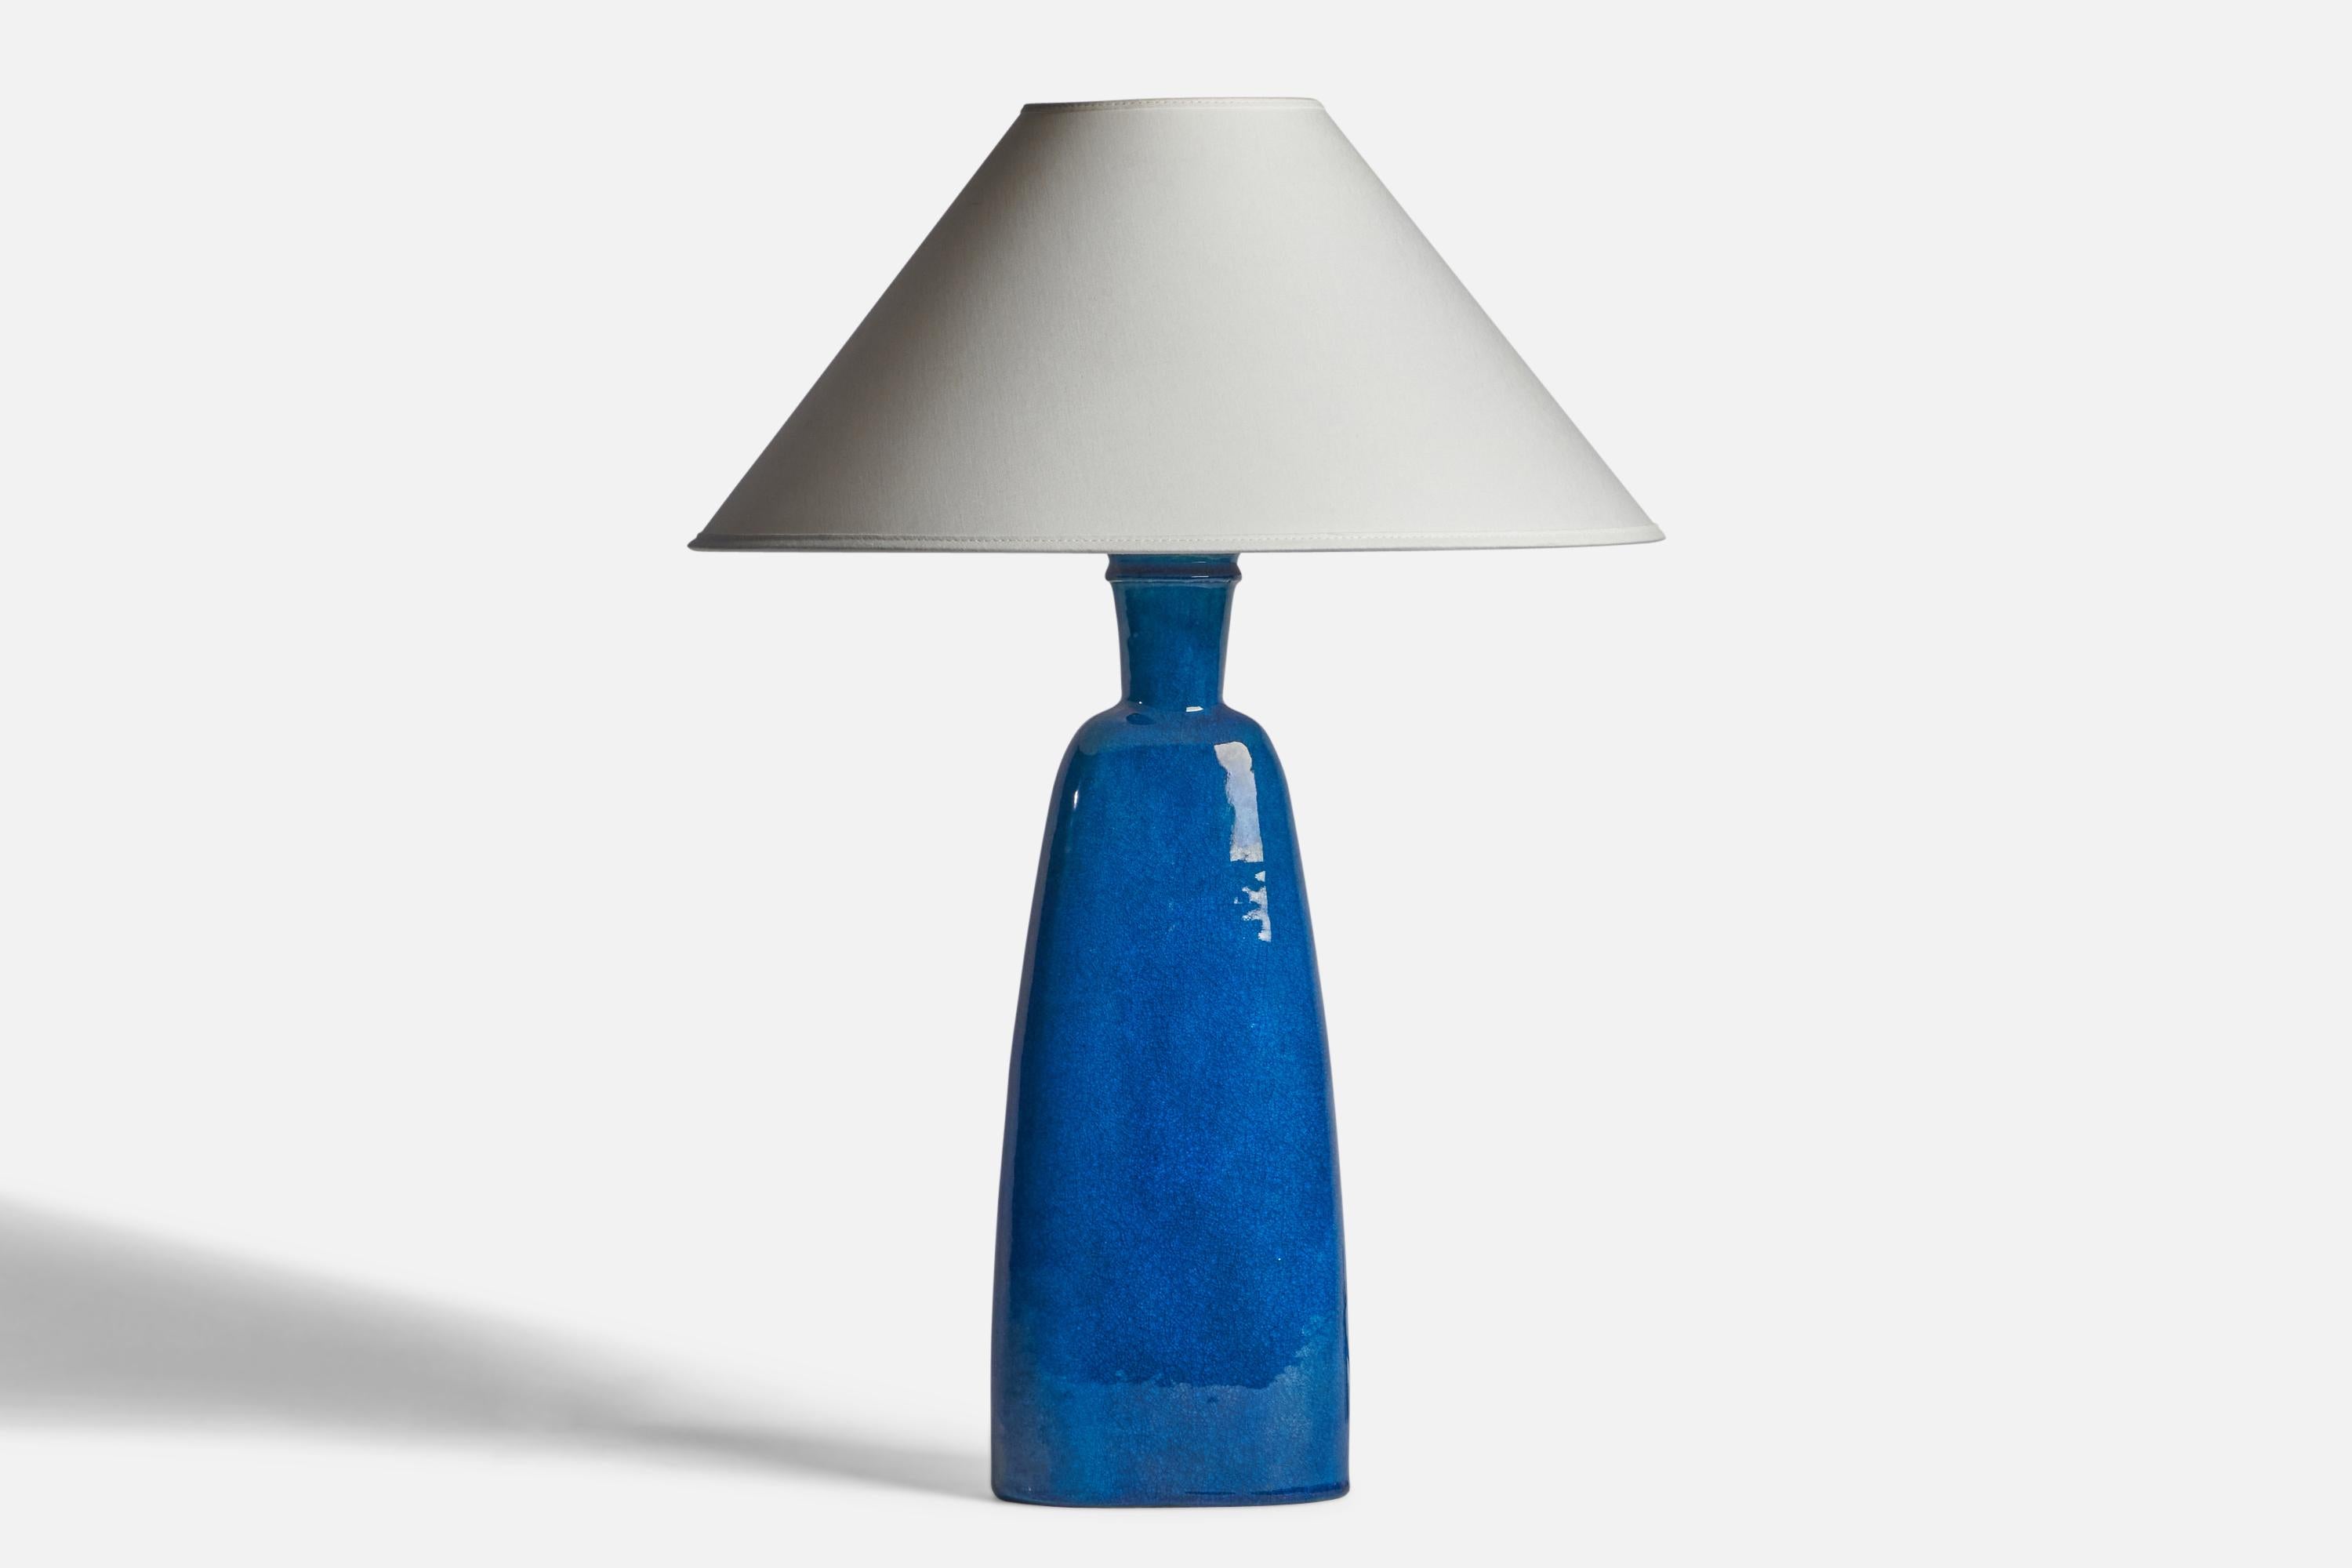 A sizeable blue-glazed ceramic table lamp designed and produced by Nils Kähler, Denmark, c. 1950s.

Dimensions of Lamp (inches): 18.25” H x 6” Diameter
Dimensions of Shade (inches): 4.5” Top Diameter x 16” Bottom Diameter x 7.25” H
Dimensions of